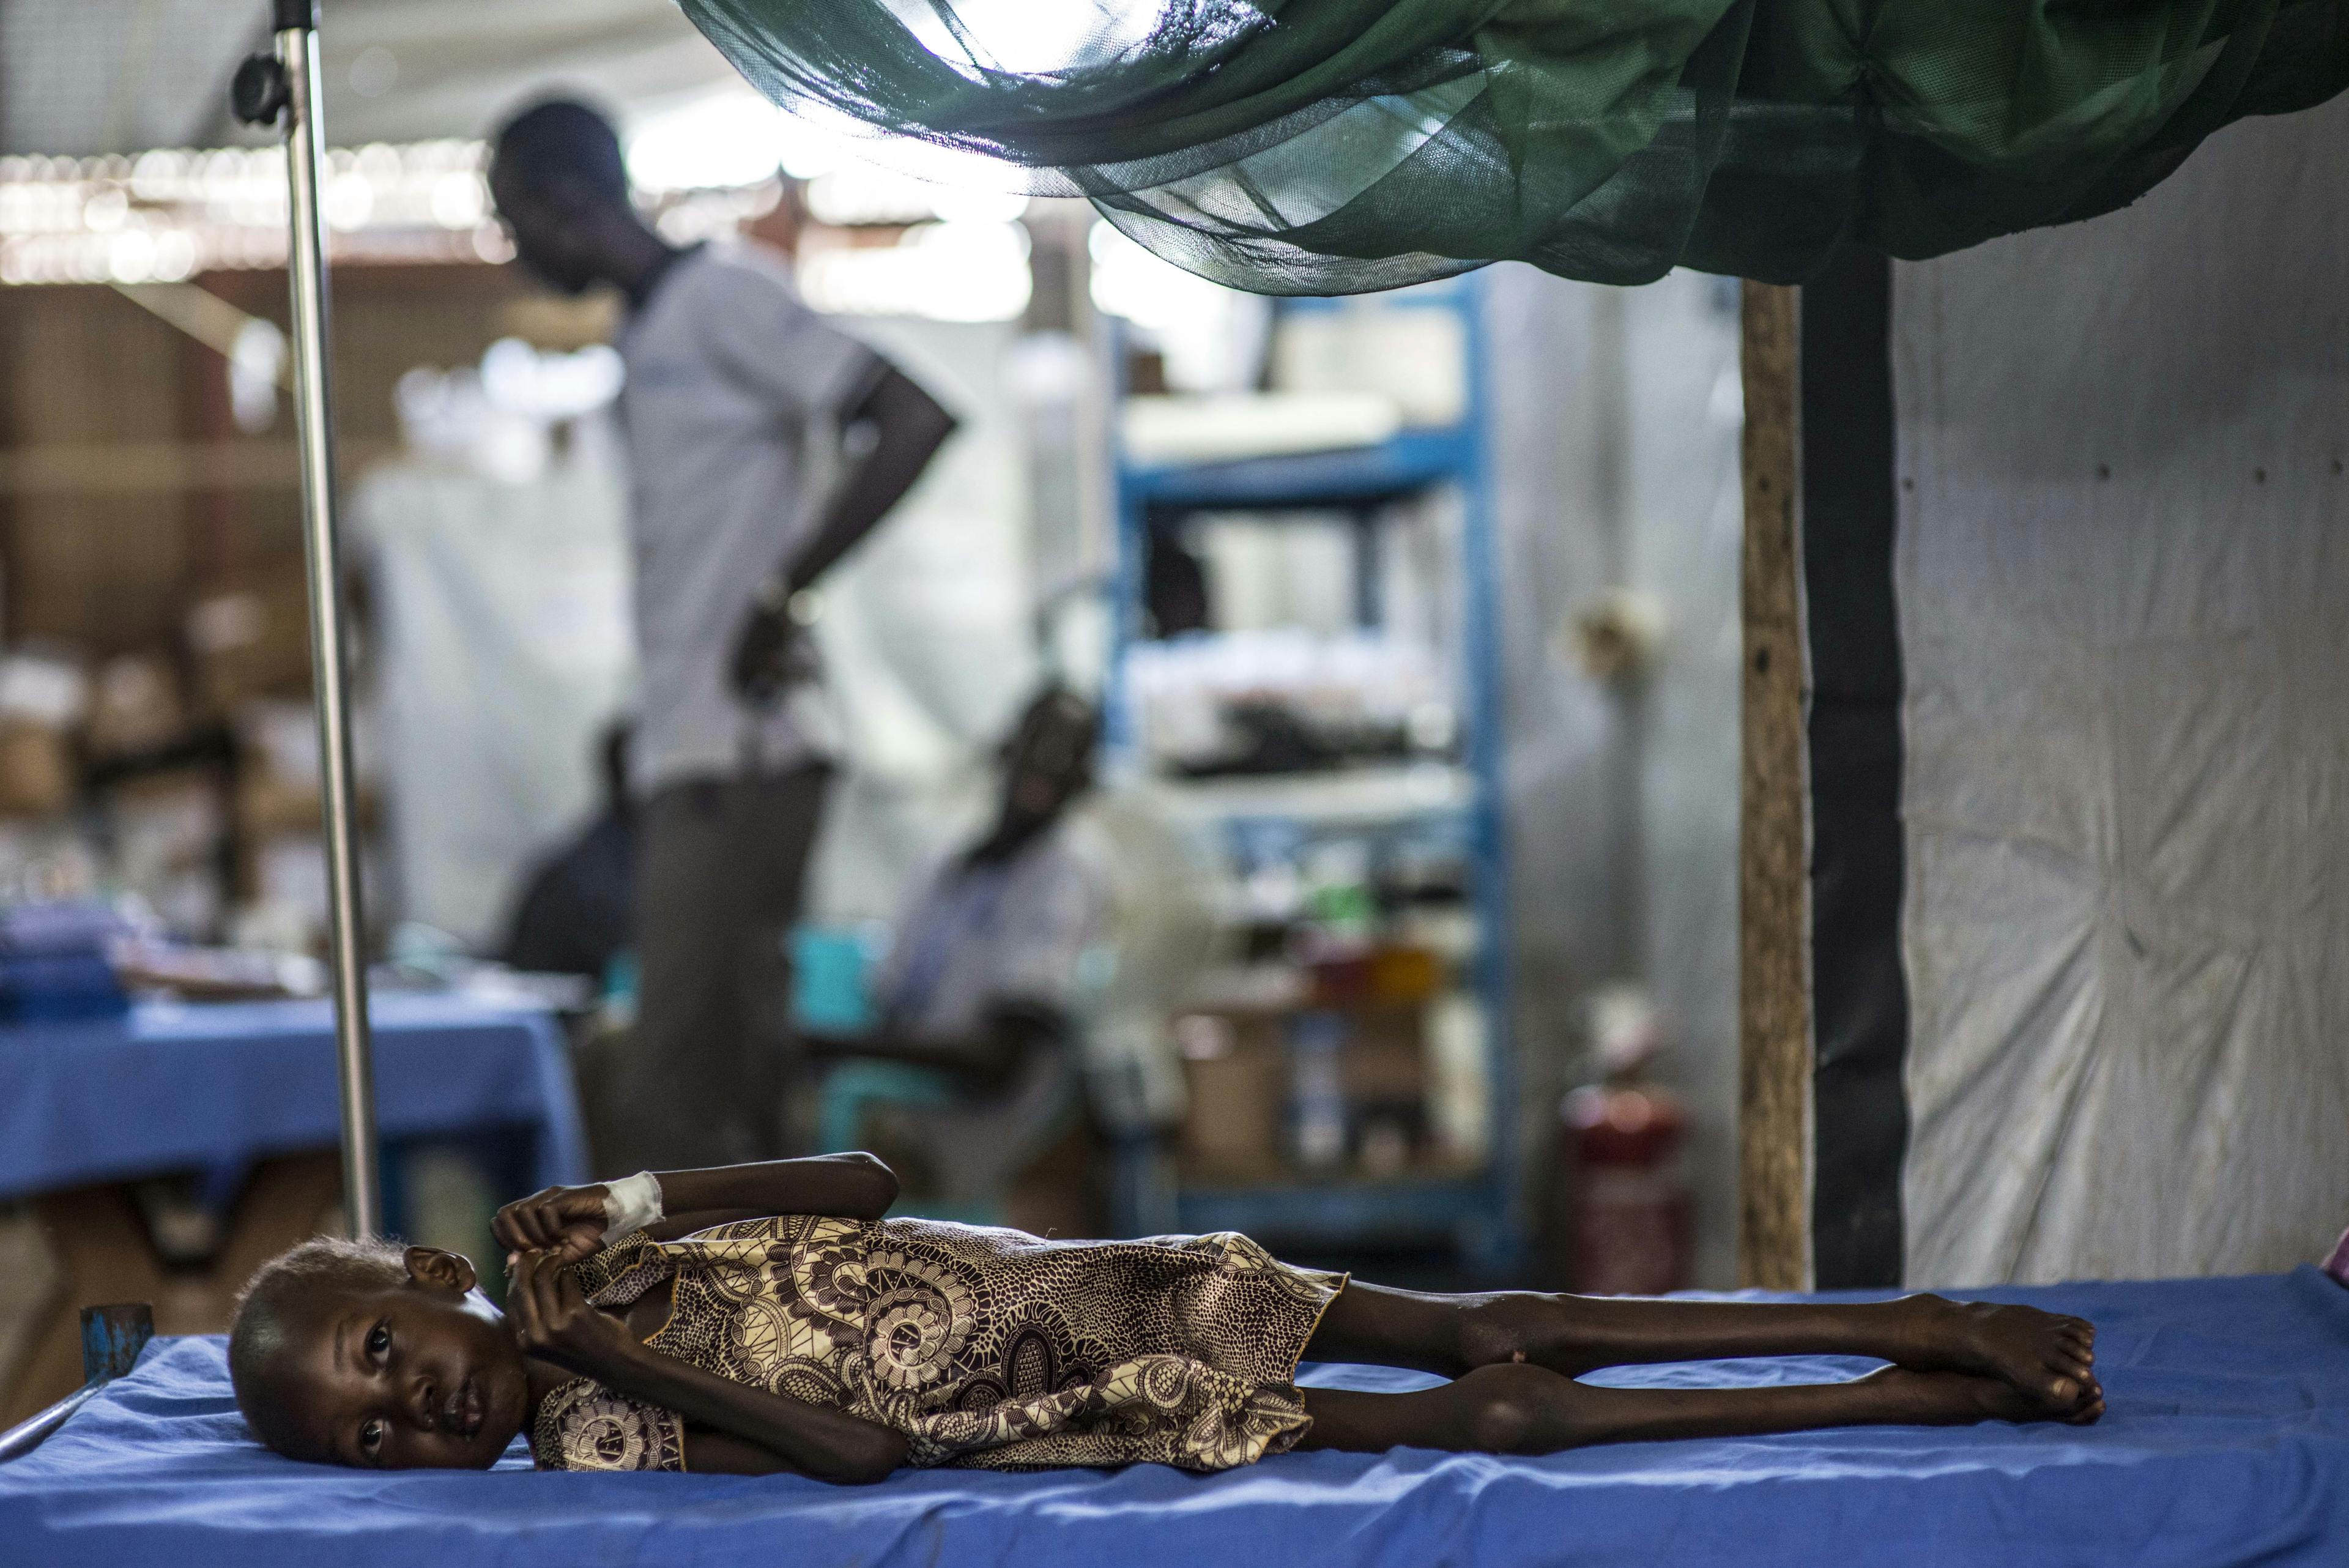 Nyajime Guet, 4, who is suffering from severe acute malnutrition and tuberculosis, lies on a bed at a UNICEF-supported clinic where she is being treated, at the Protection of Civilians (PoC) site in Juba, South Sudan, Monday, 12 October 2015. A four-year-old of her age and height should weigh 19.5 kilograms, rather than the 9 kilograms Nyajime weighs.